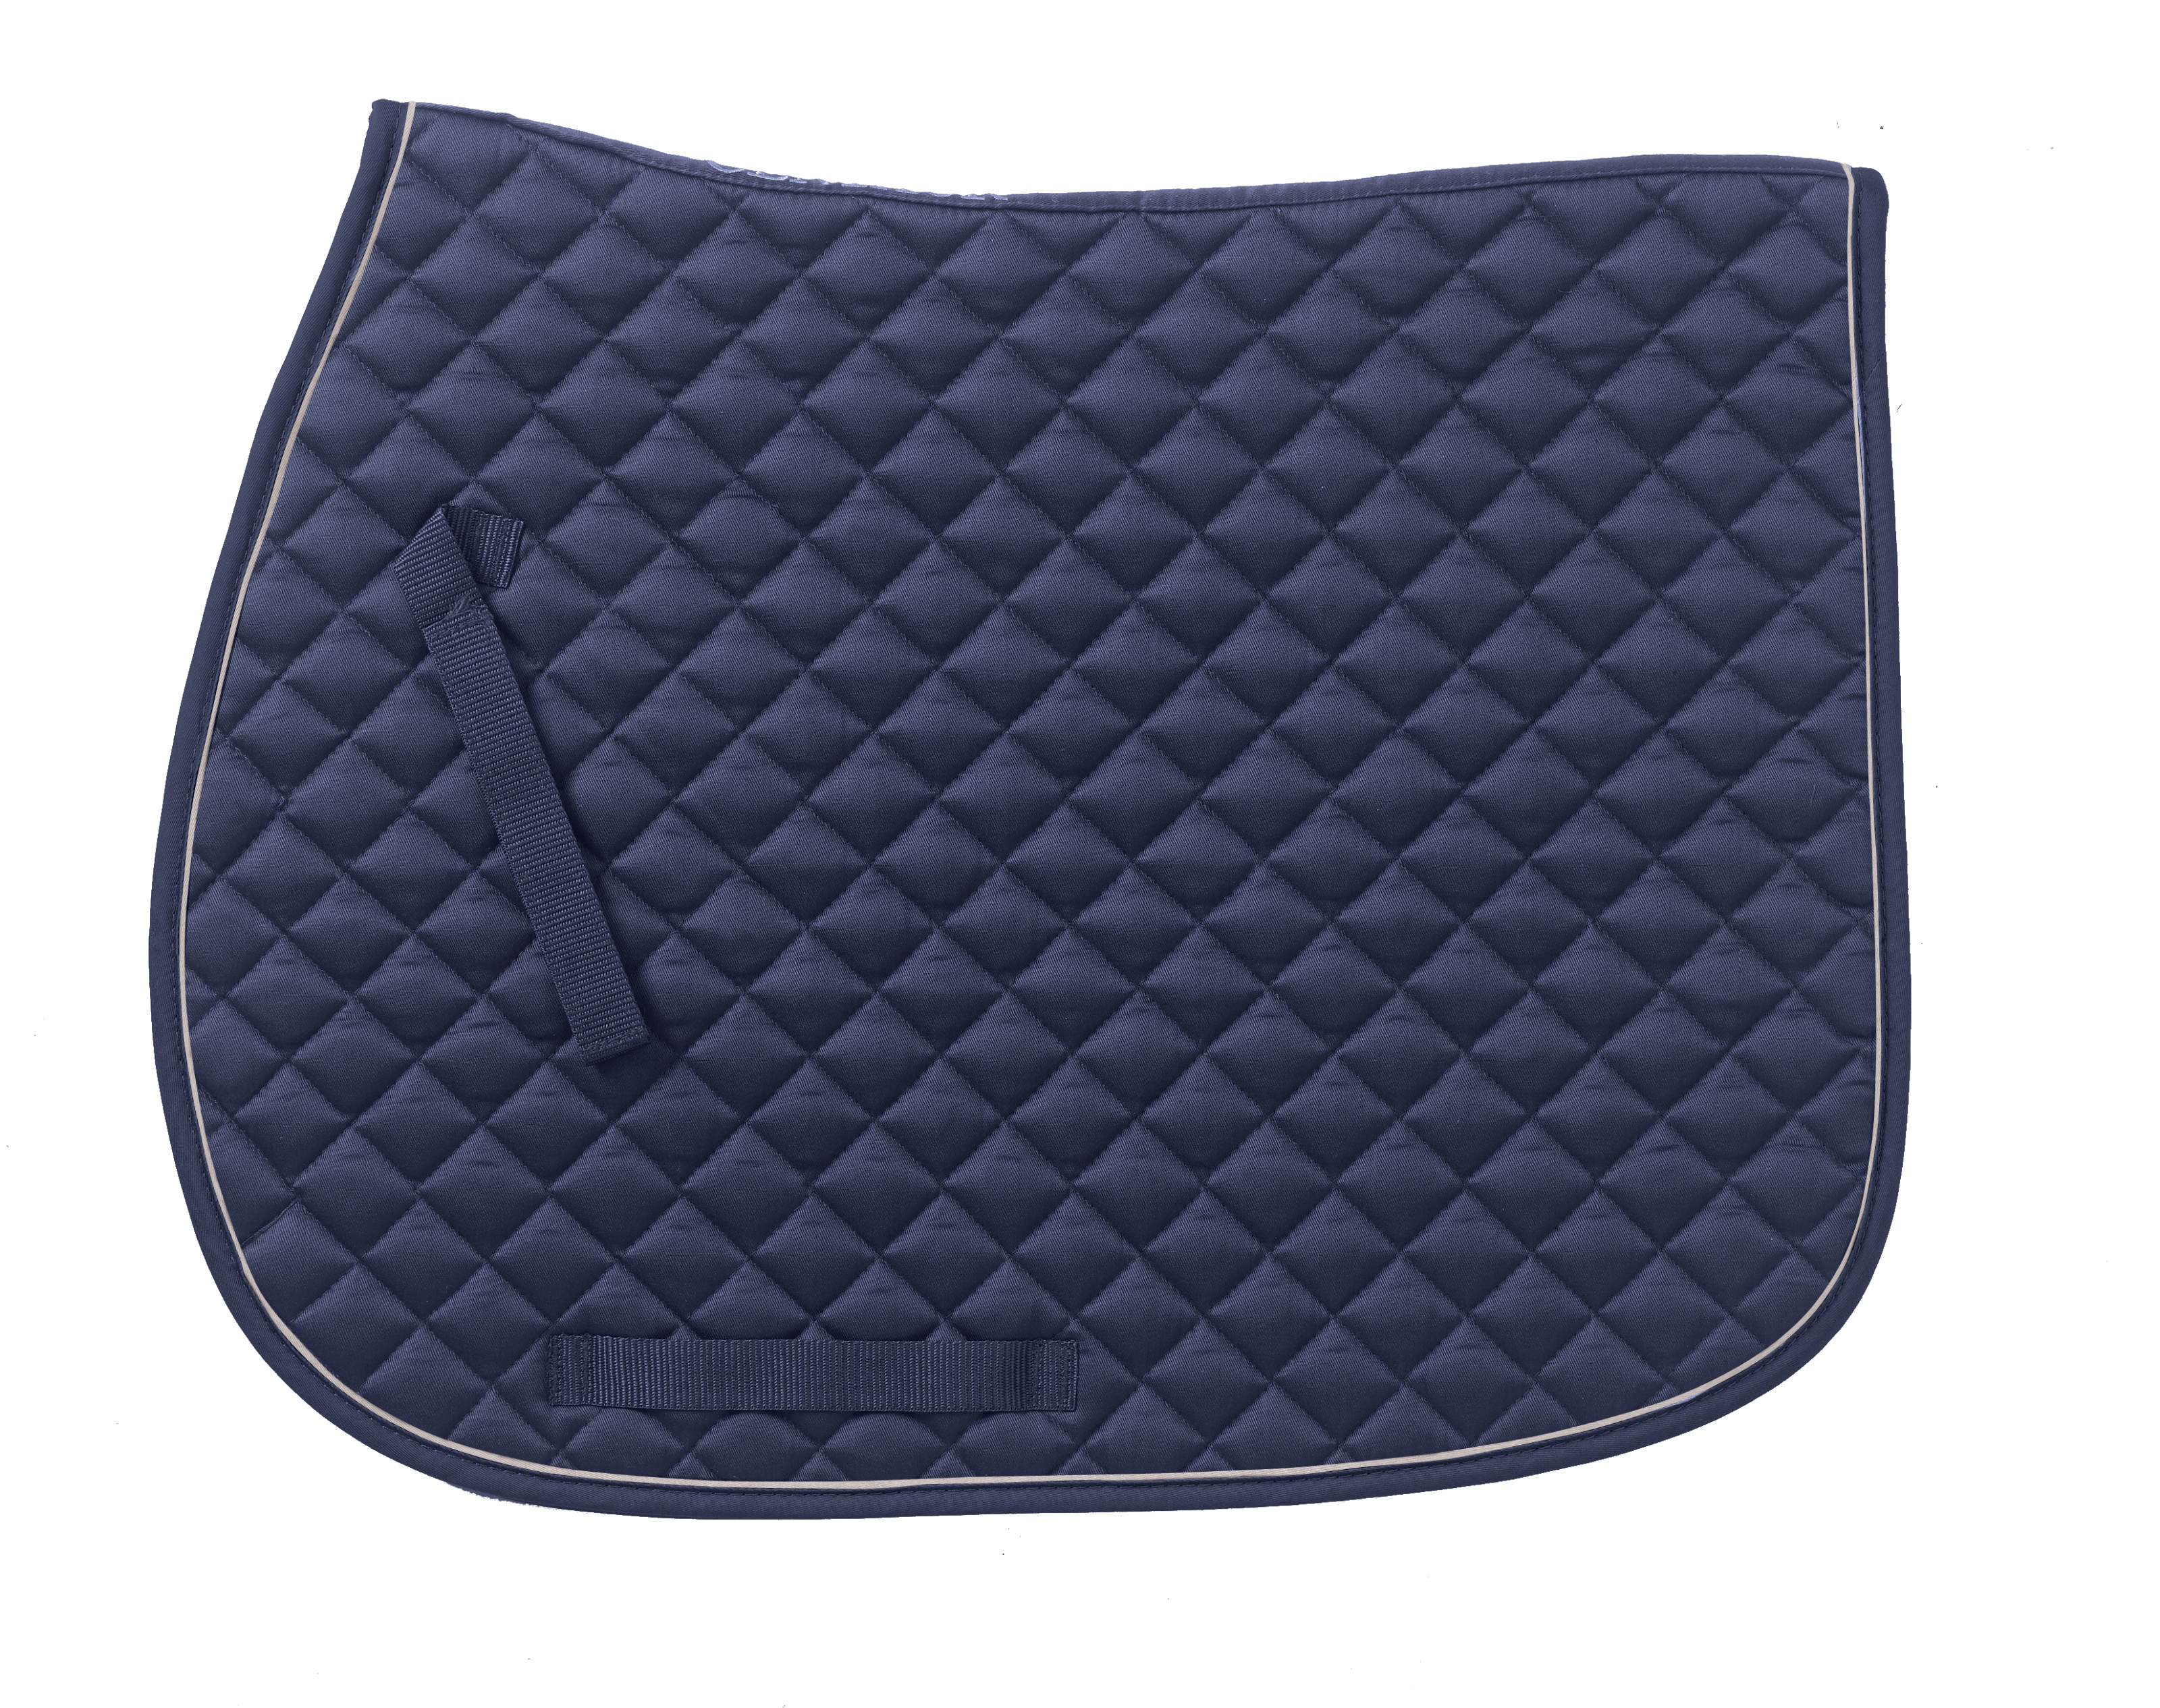 Ovation Coolmax Piped All Purpose Pad - Navy/White - Ovation-470051 ...